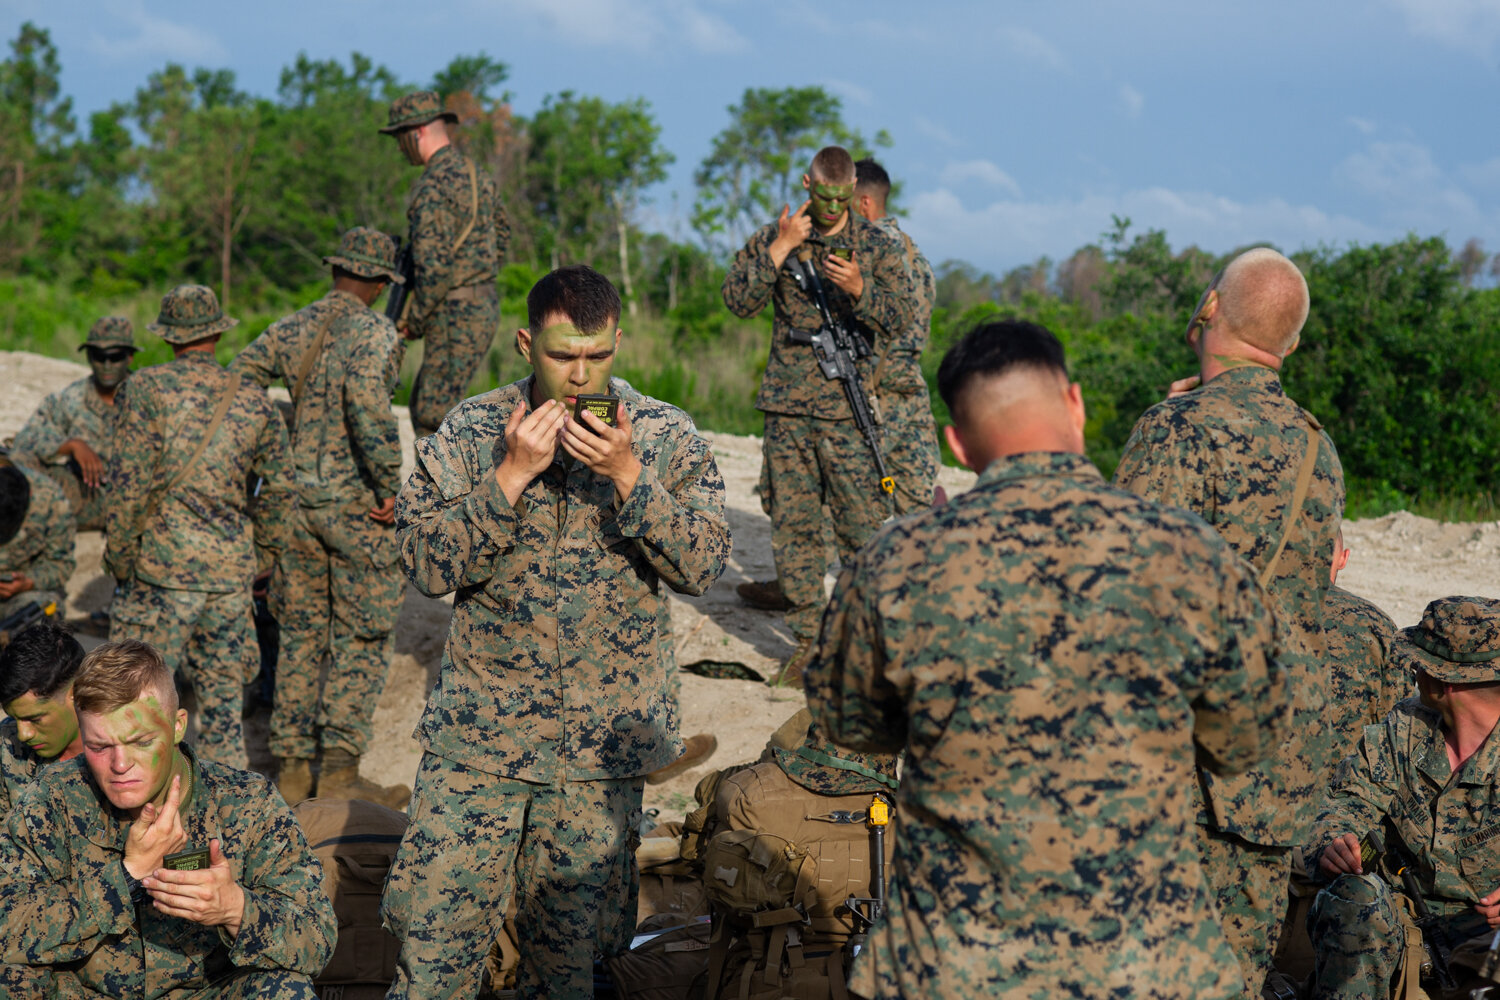  Marines apply camouflage before the assault exercise begins. Nearly 500 Marines took part in what Lieutenant Colonel Darrel Ayers called the largest air assault exercise on the east coast in approximately 10 years.  (See the award-winning photo essa